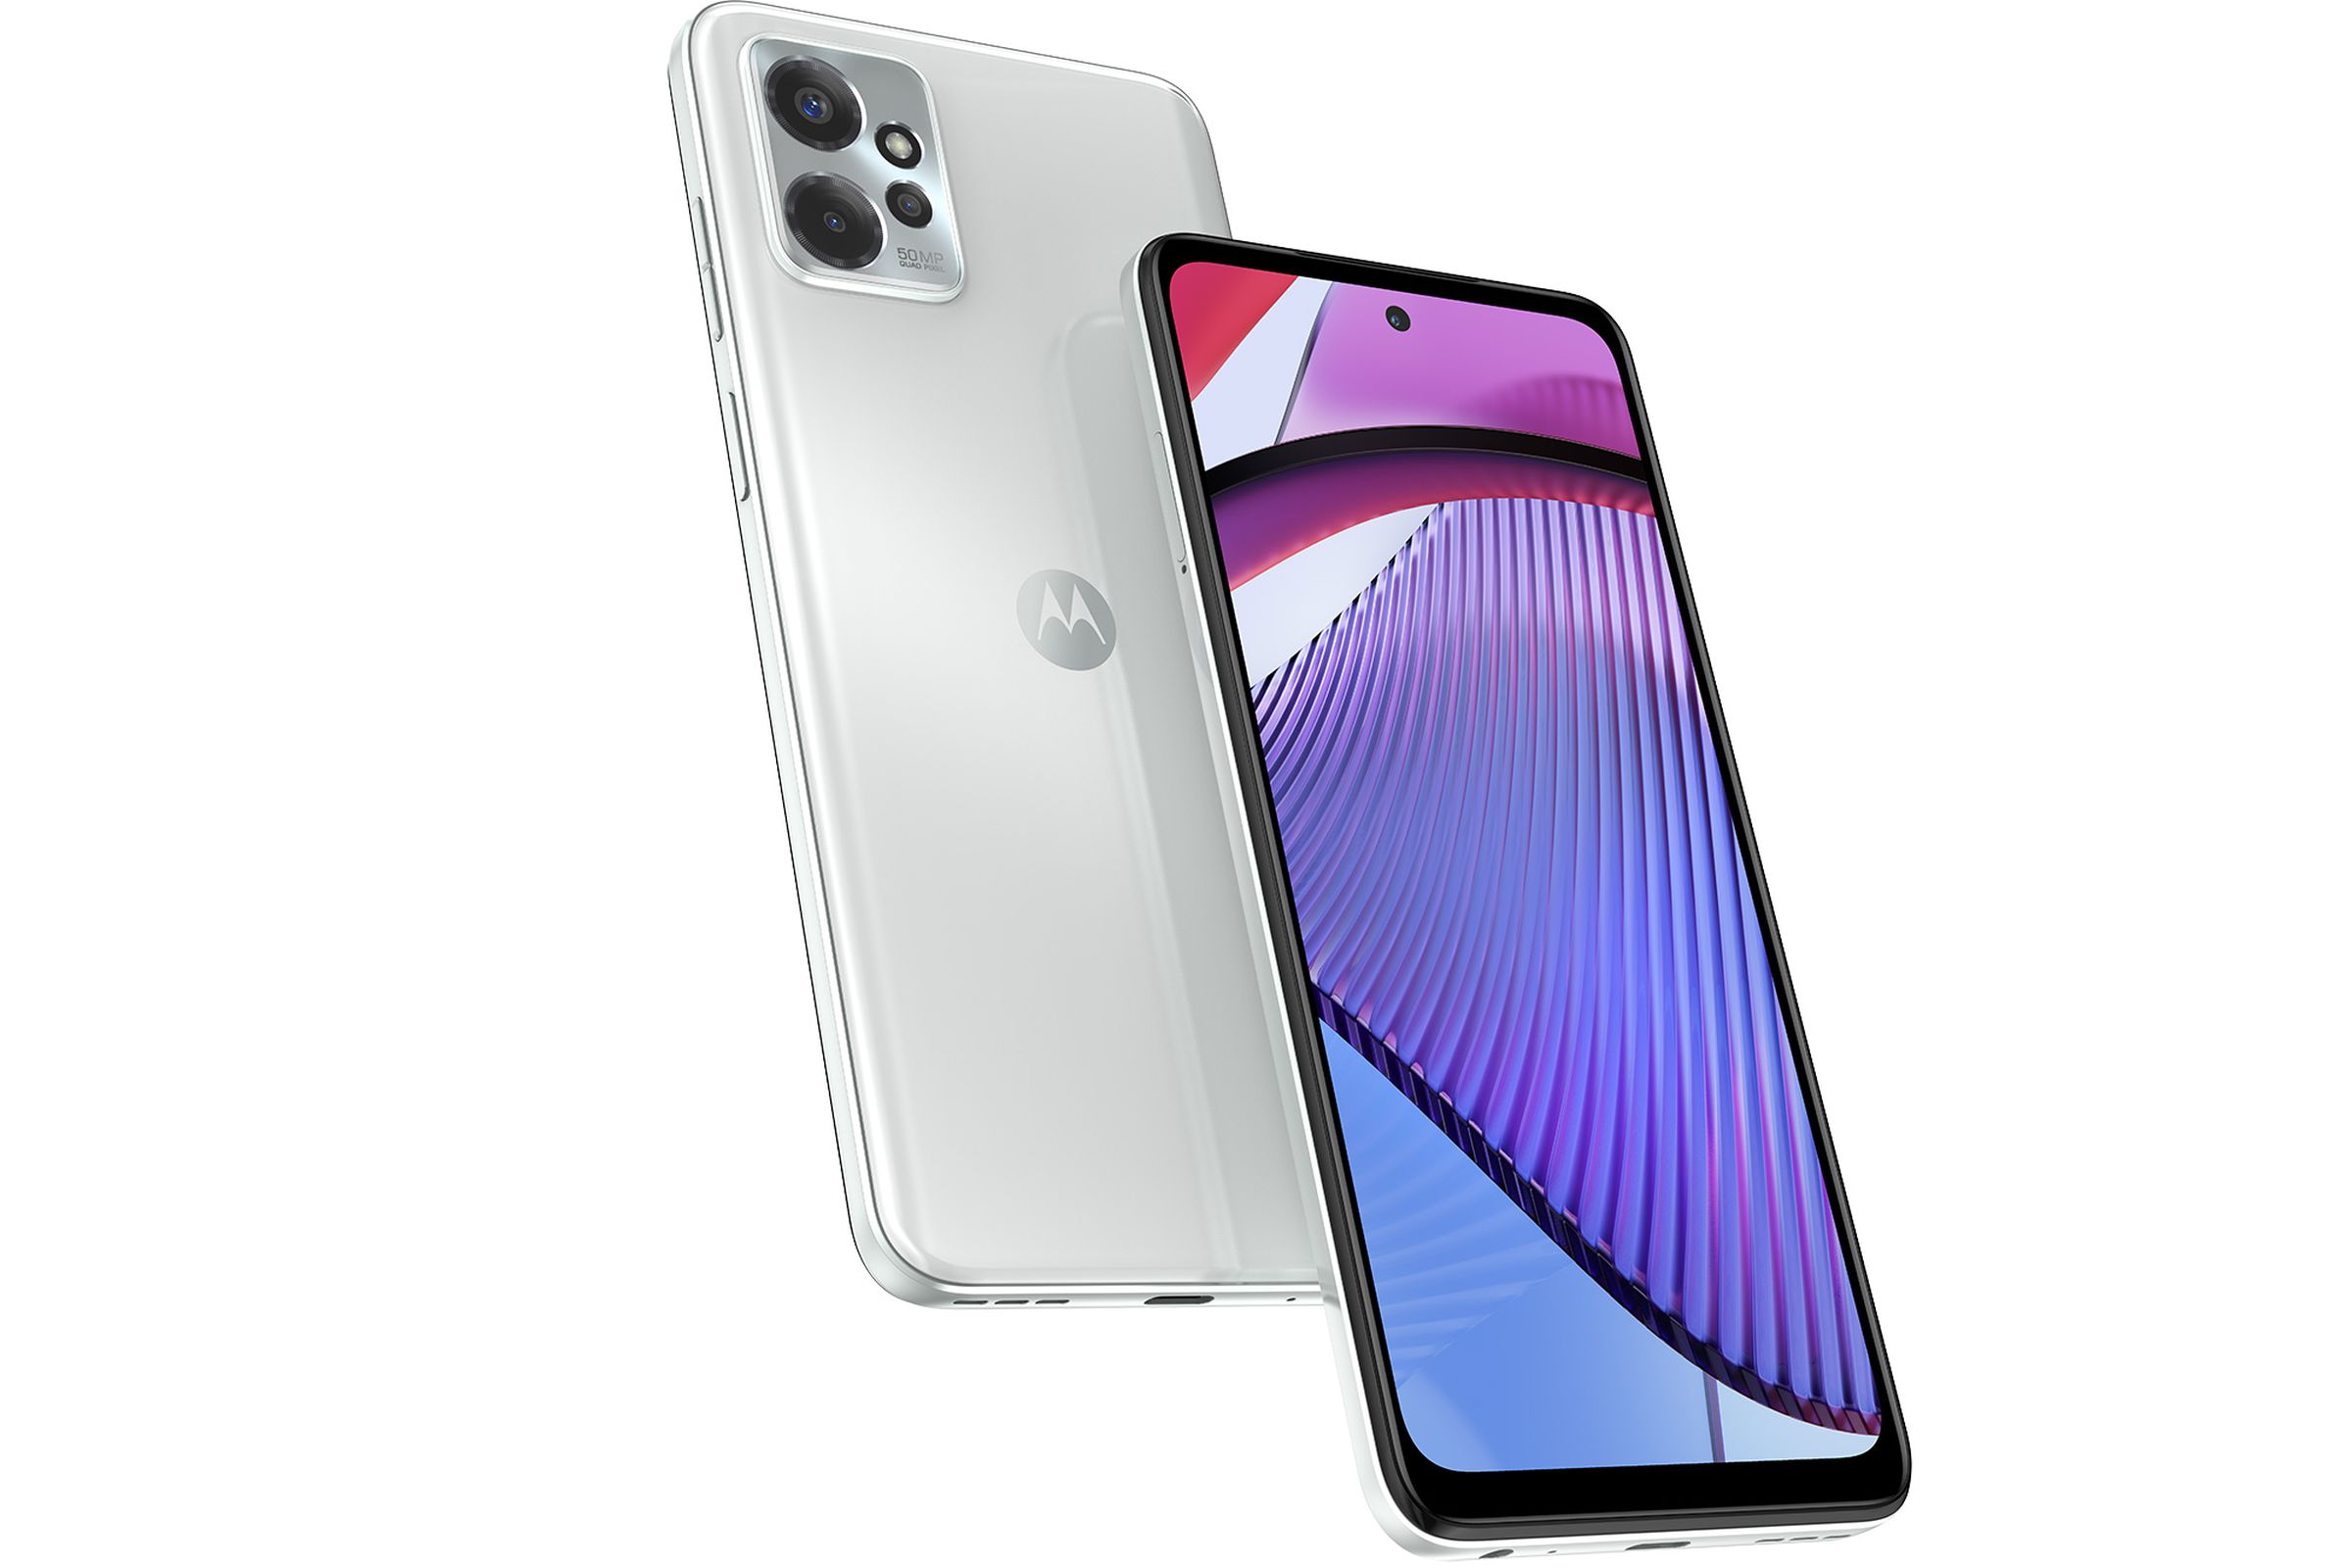 Image of Motorola Moto G Power 5G in pearl white showing rear and front of the device.